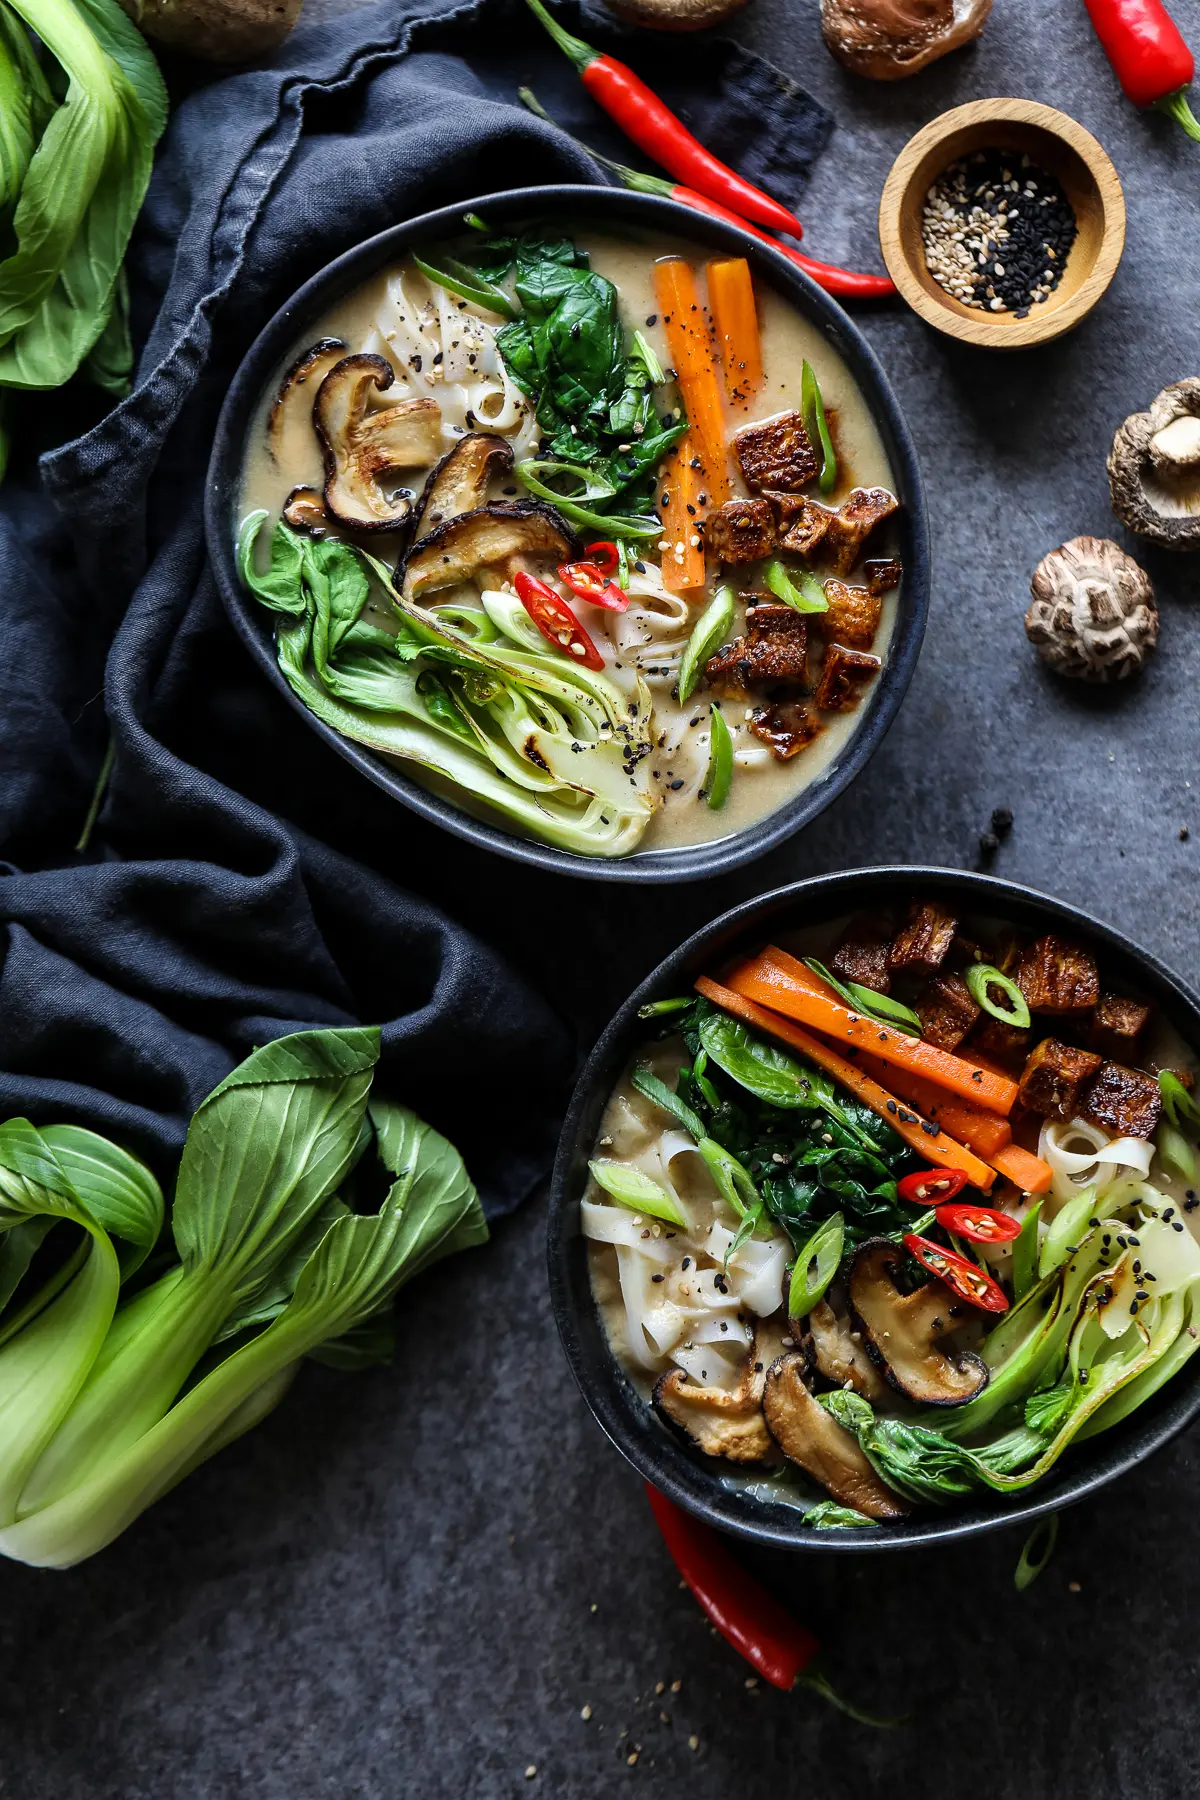 Two Vegan Ramen Bowls Surrounded by Ingredients.